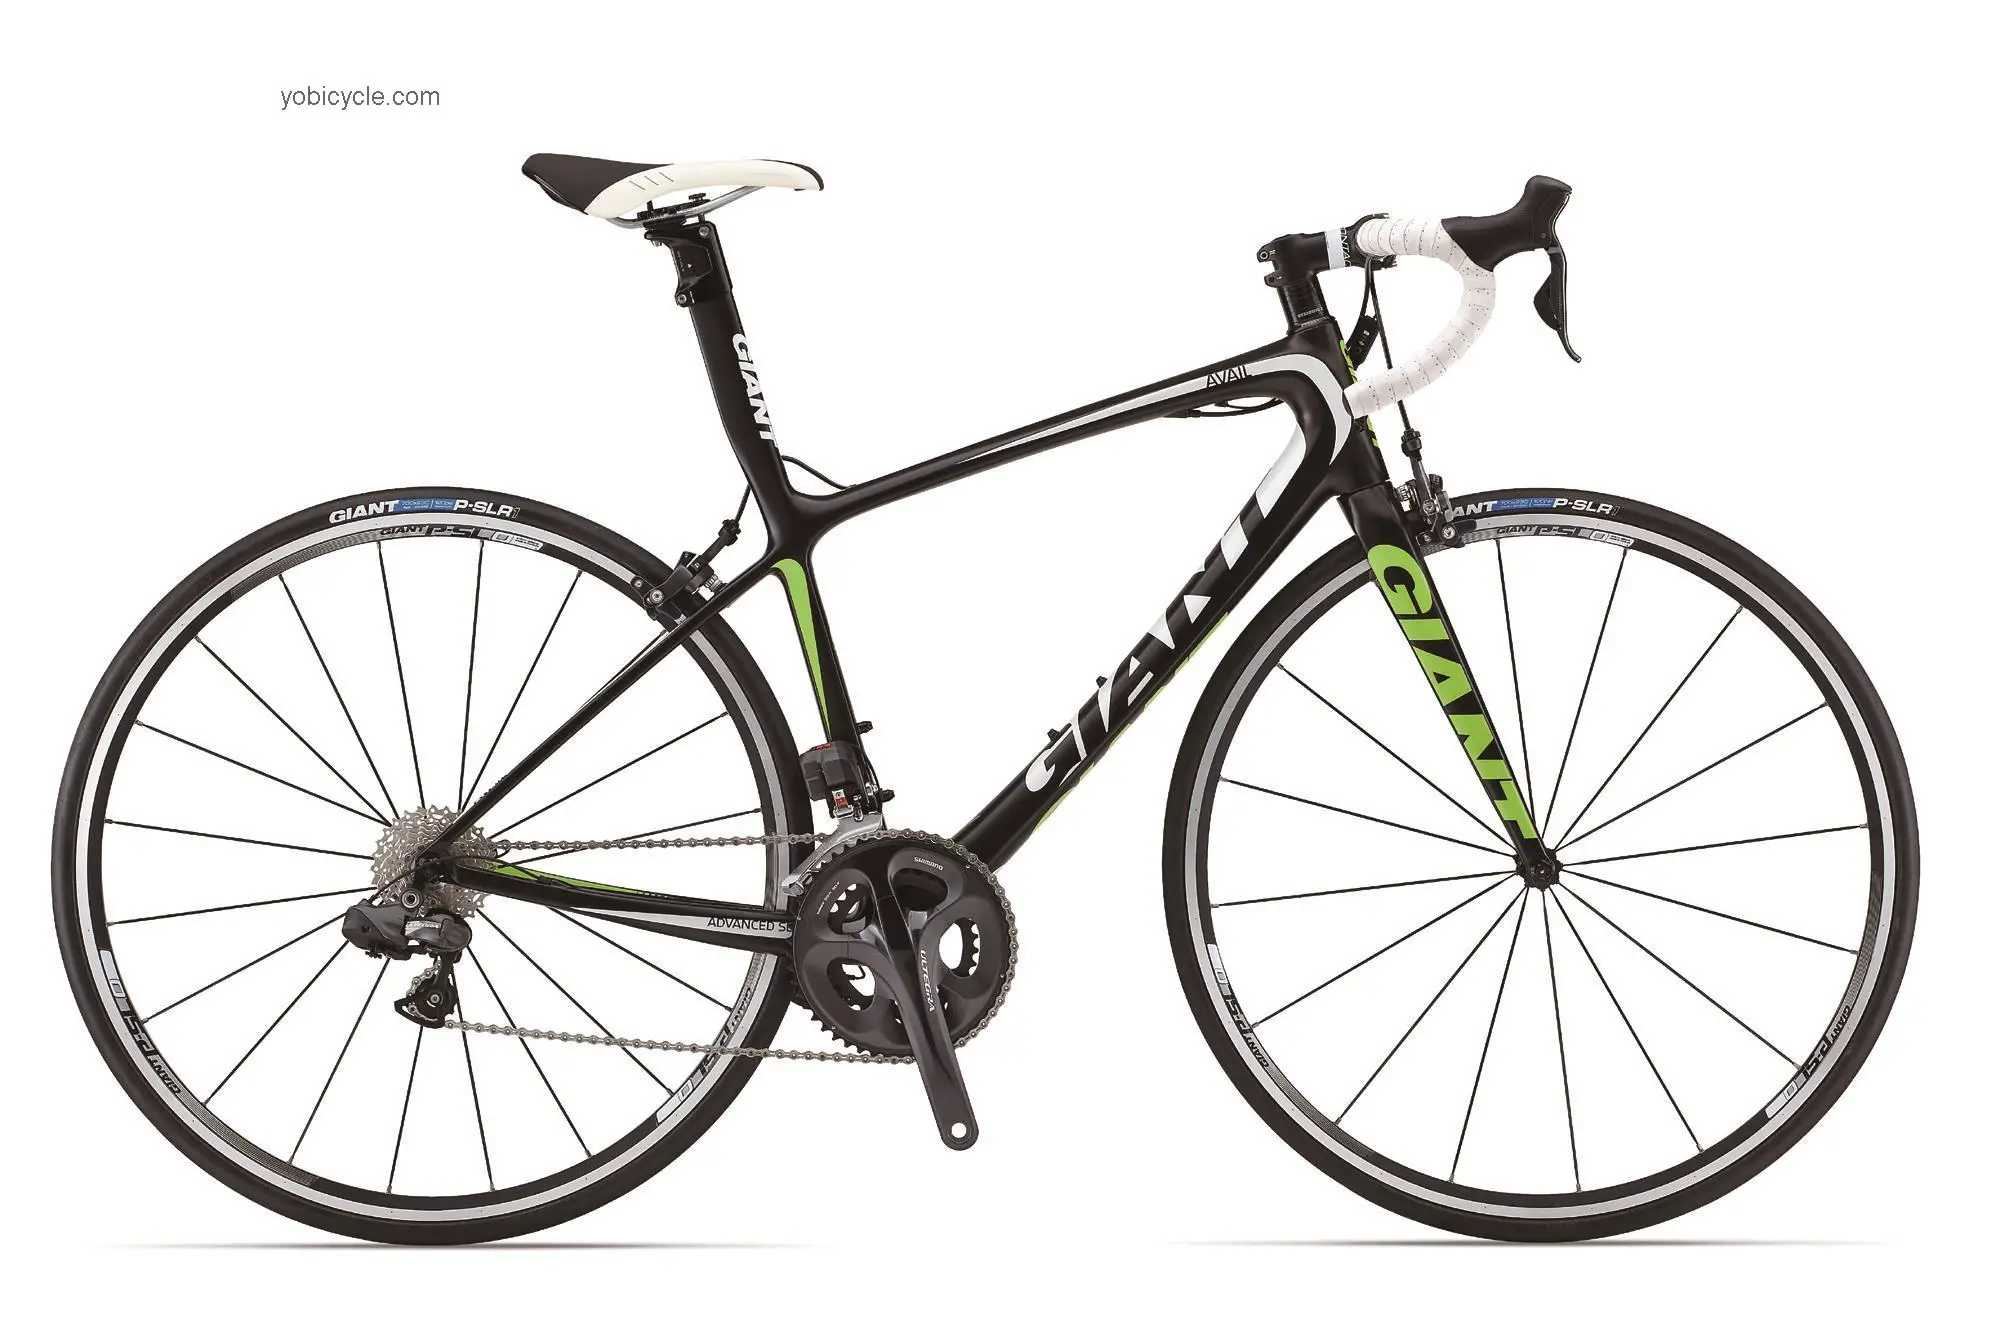 Giant Avail Advanced SL 1 2013 comparison online with competitors